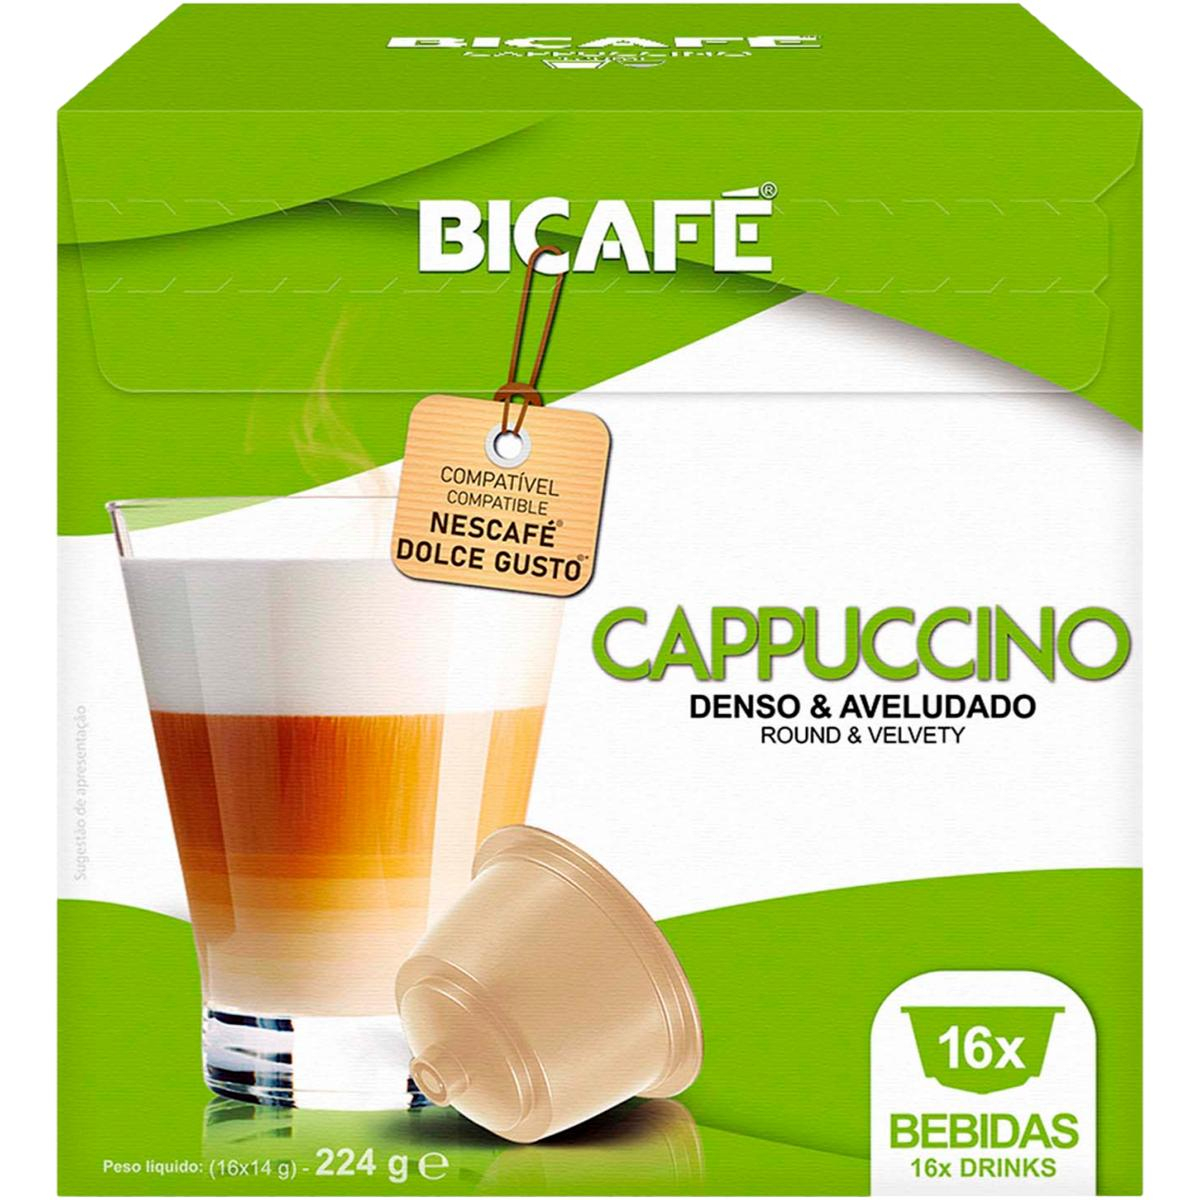 https://ibercoffee.com/4452-thickbox_default/capsules-dolce-gusto-cappuccino-bicafe-16-un.jpg